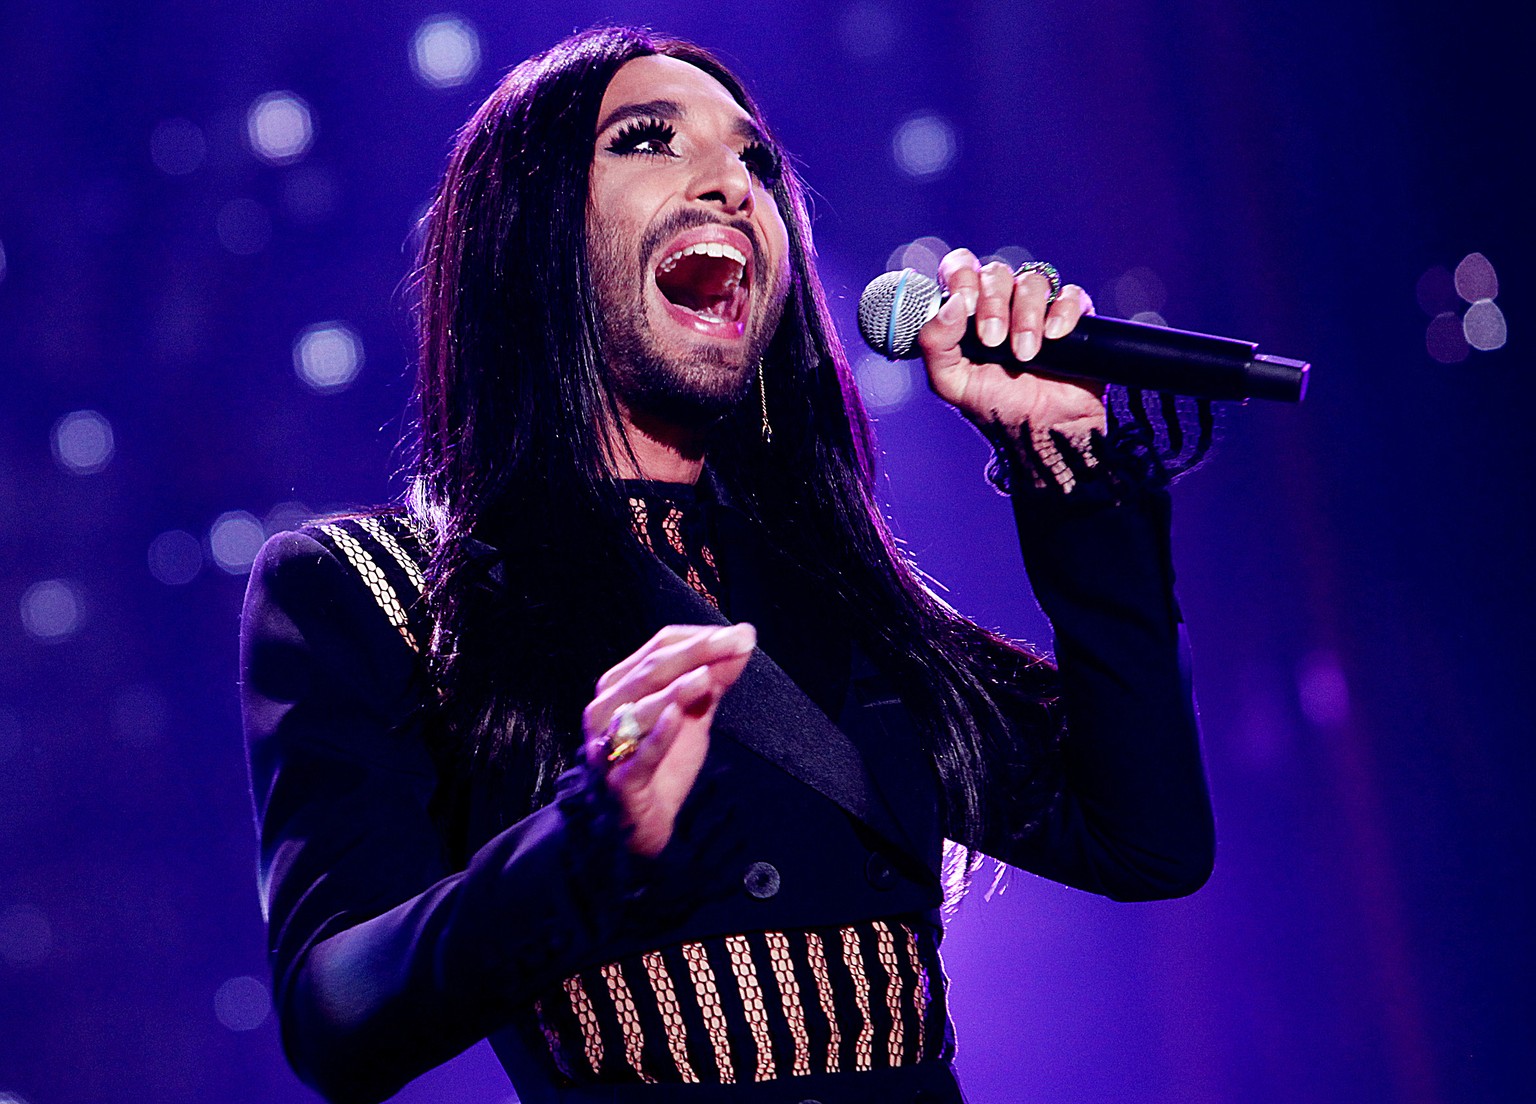 Austrian cross-dressing diva Conchita Wurst sings at a concert in Kielce, Poland, on Saturday, June 27, 2015. Local authorities banned music fans from bringing glass bottles and metal objects to the c ...